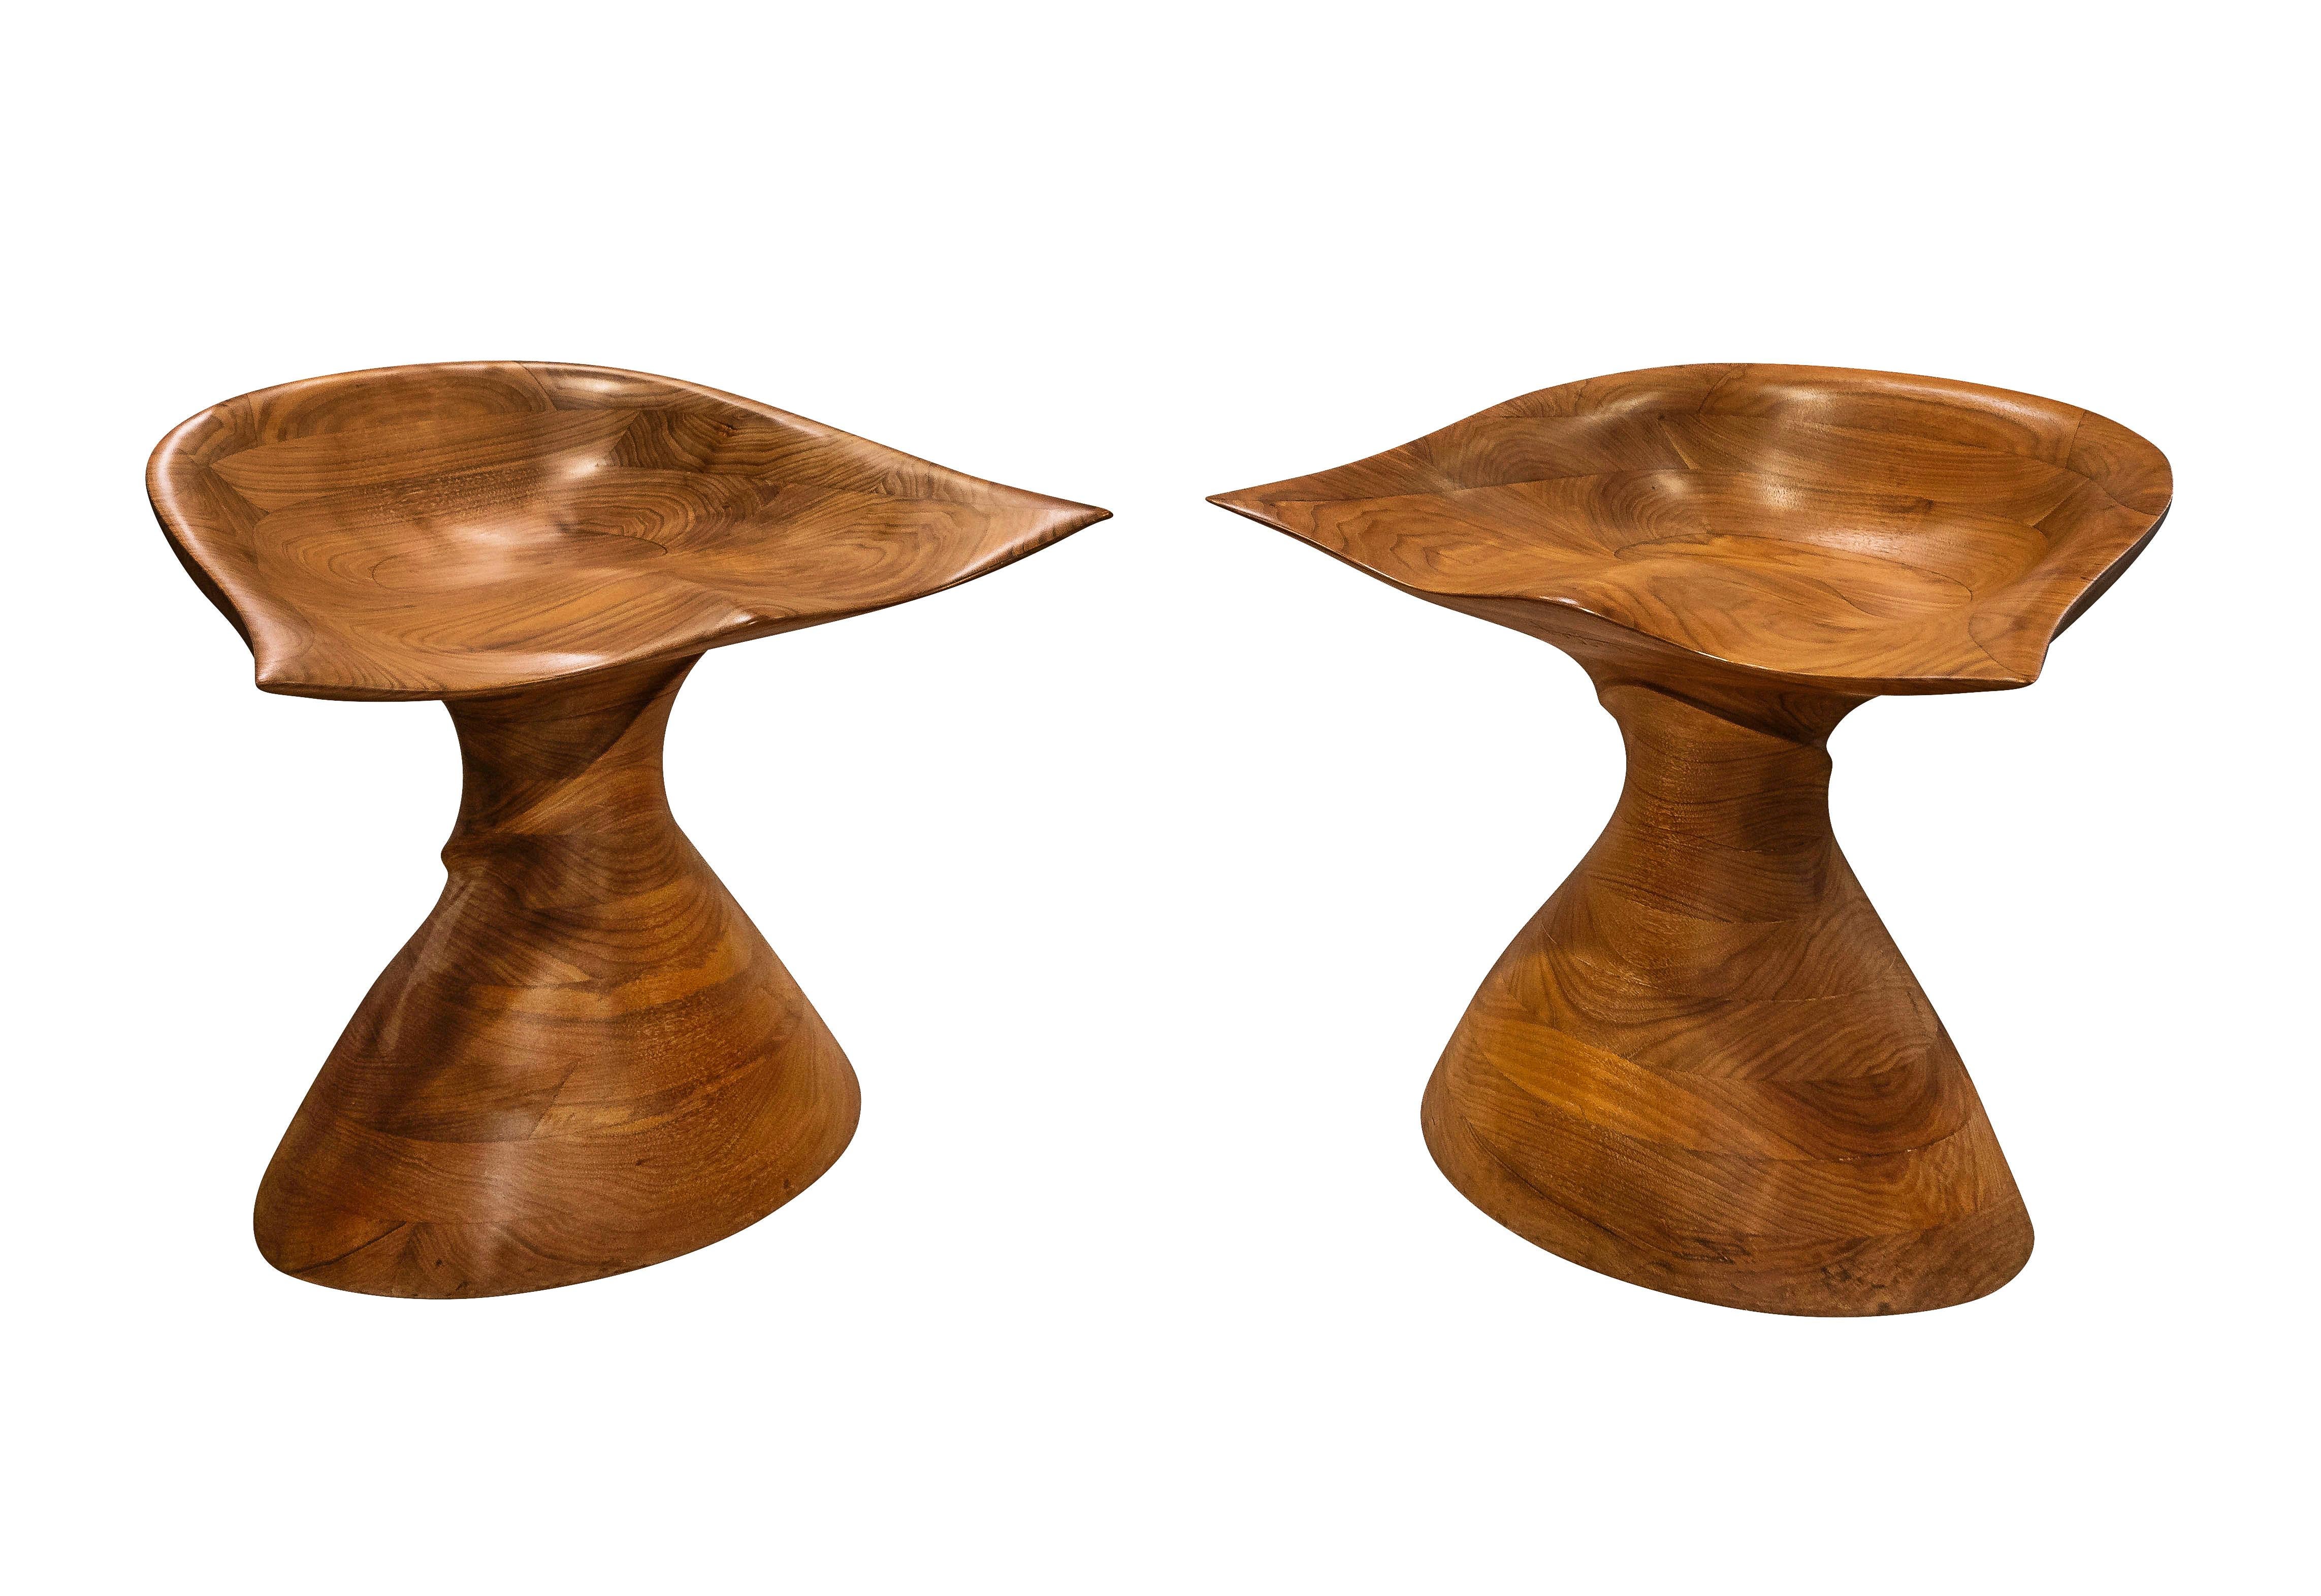 Modern Michael Coffey Rare Set of 6 Hand-Carved Stools in Walnut 2007 (Signed) For Sale